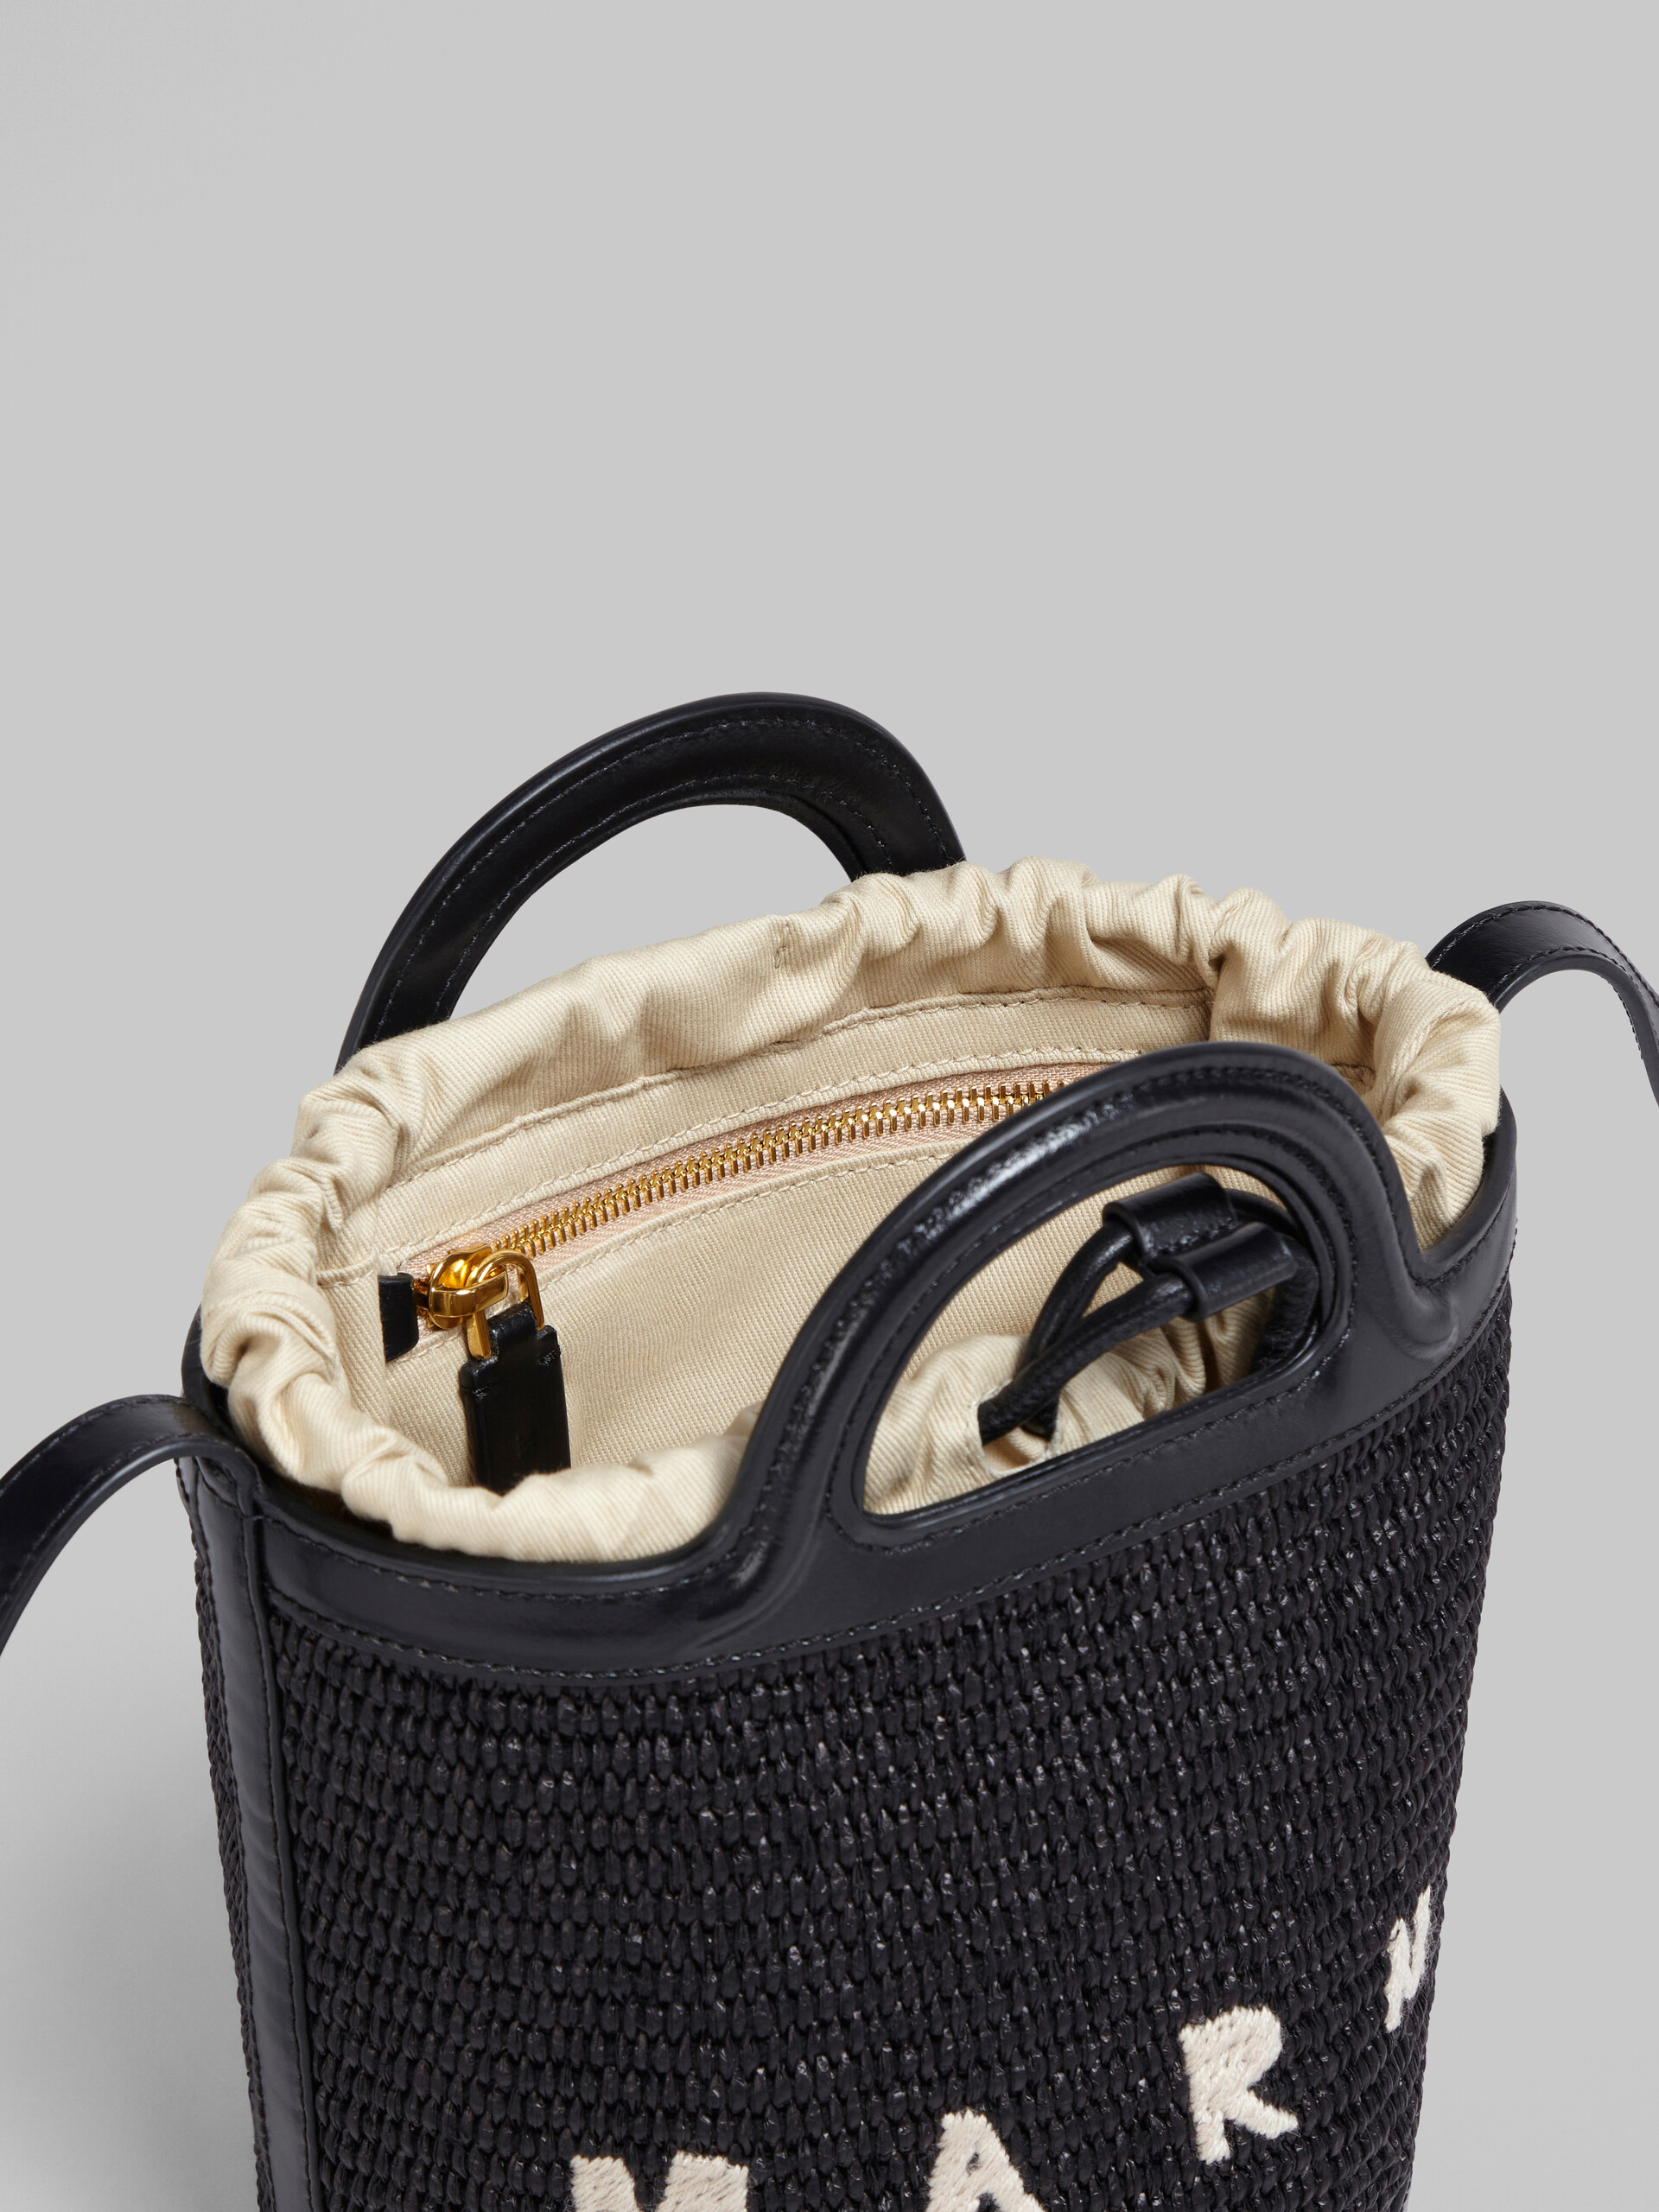 Tropicalia Small Bucket Bag in black leather and raffia - Shoulder Bags - Image 4